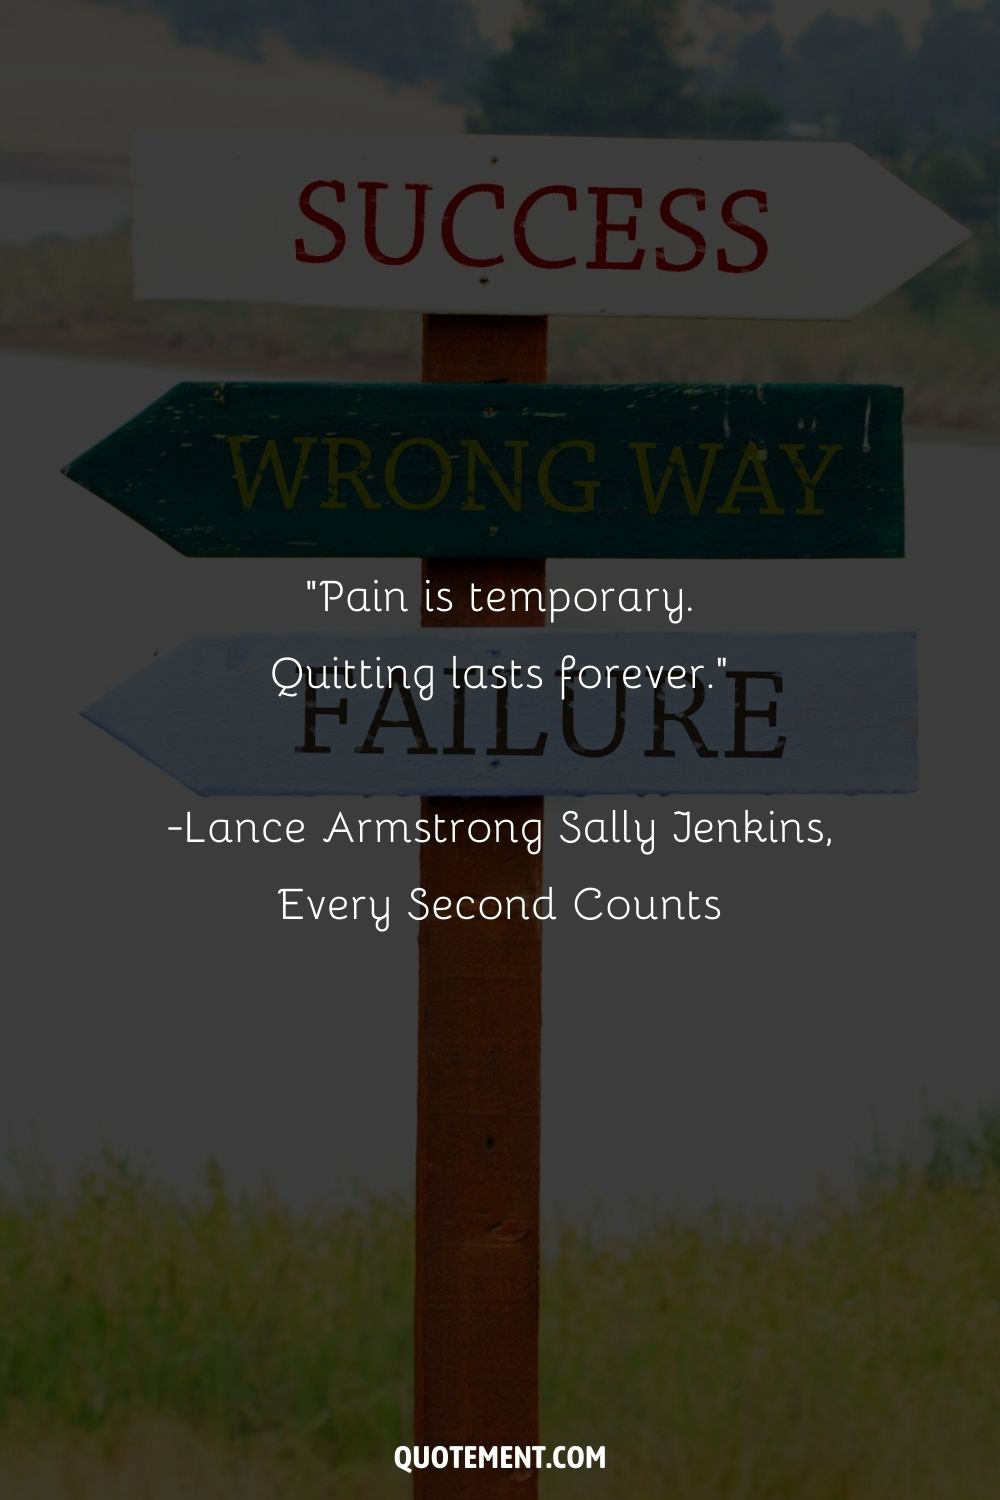 “Pain is temporary. Quitting lasts forever.” ― Lance Armstrong Sally Jenkins, Every Second Counts